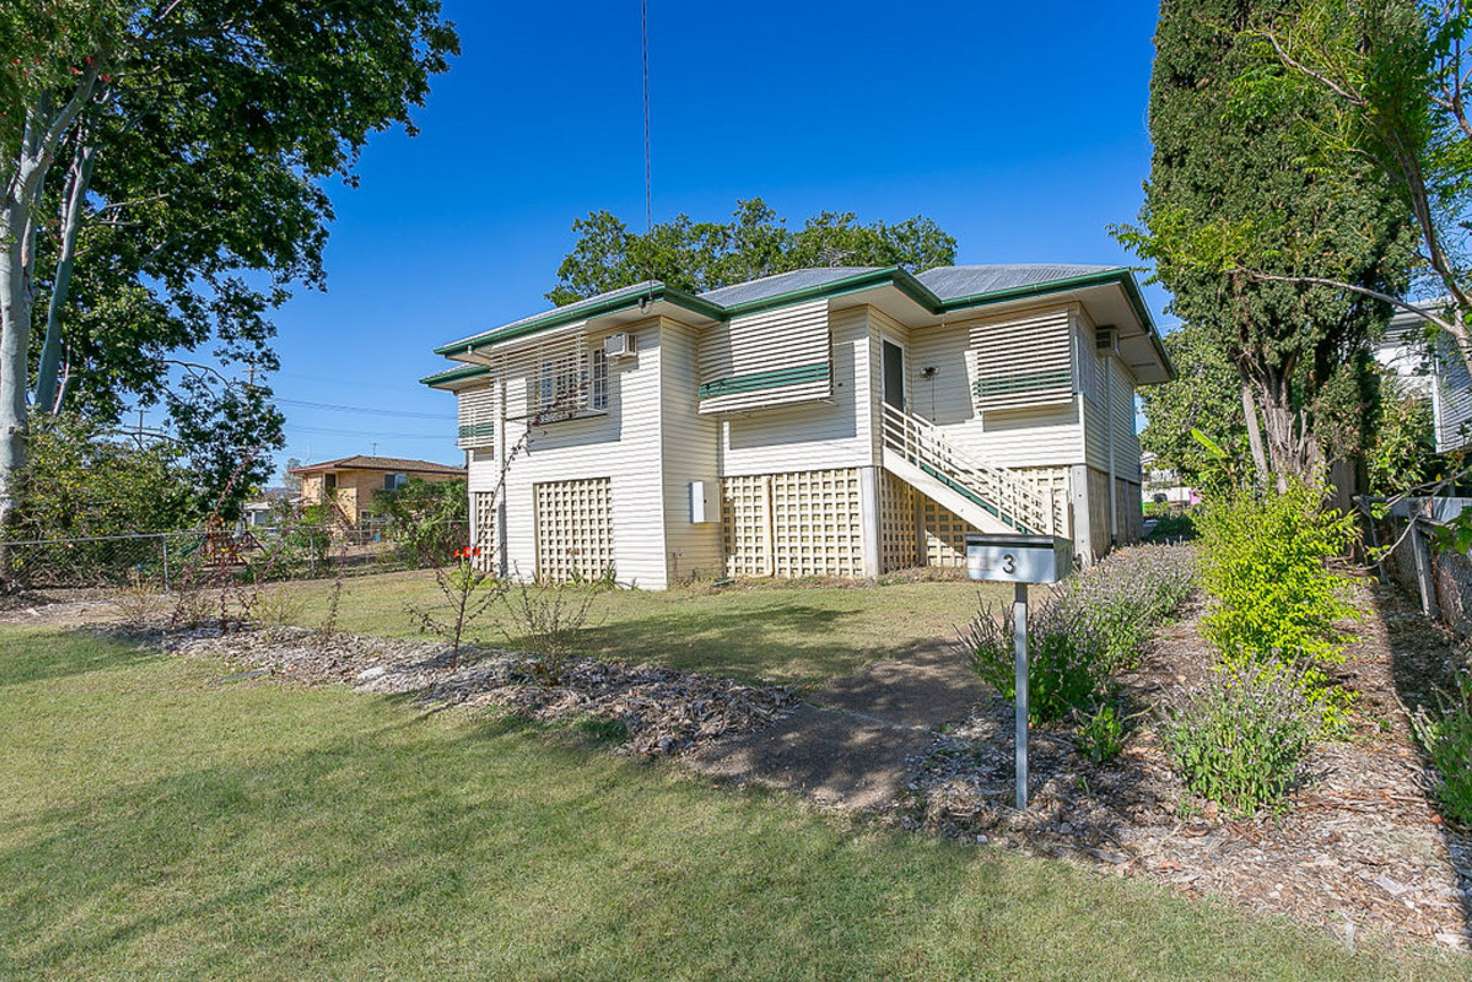 Main view of Homely house listing, 3 Barker Street, Ipswich QLD 4305